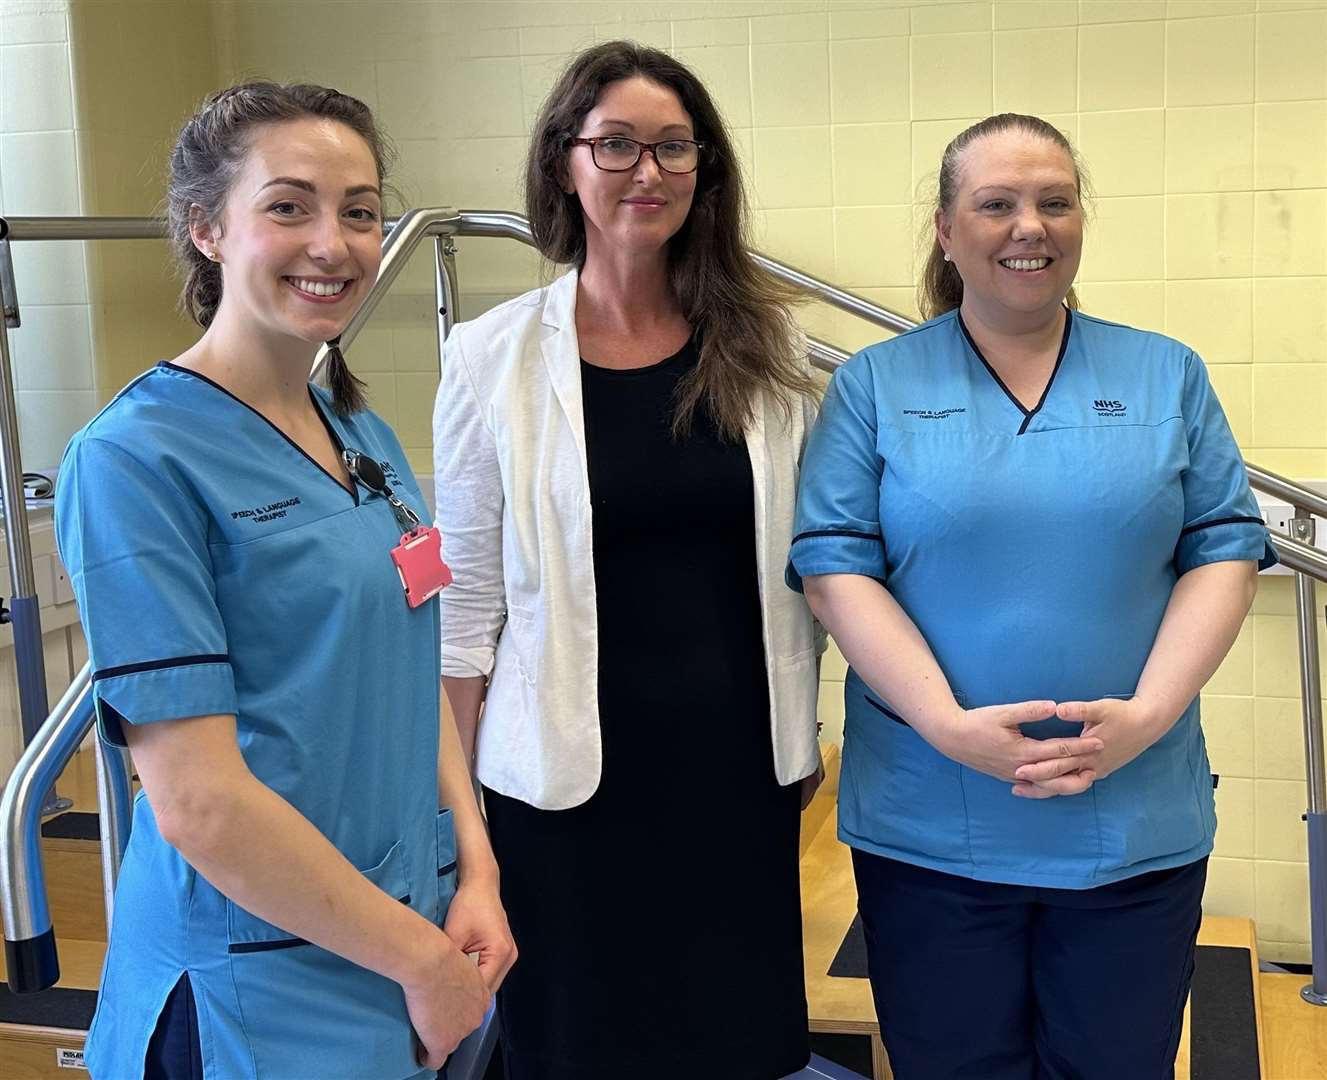 NHS Grampian innovators Rachel Allanach (left) and Clare Tarr (right) with Leigh Mair.